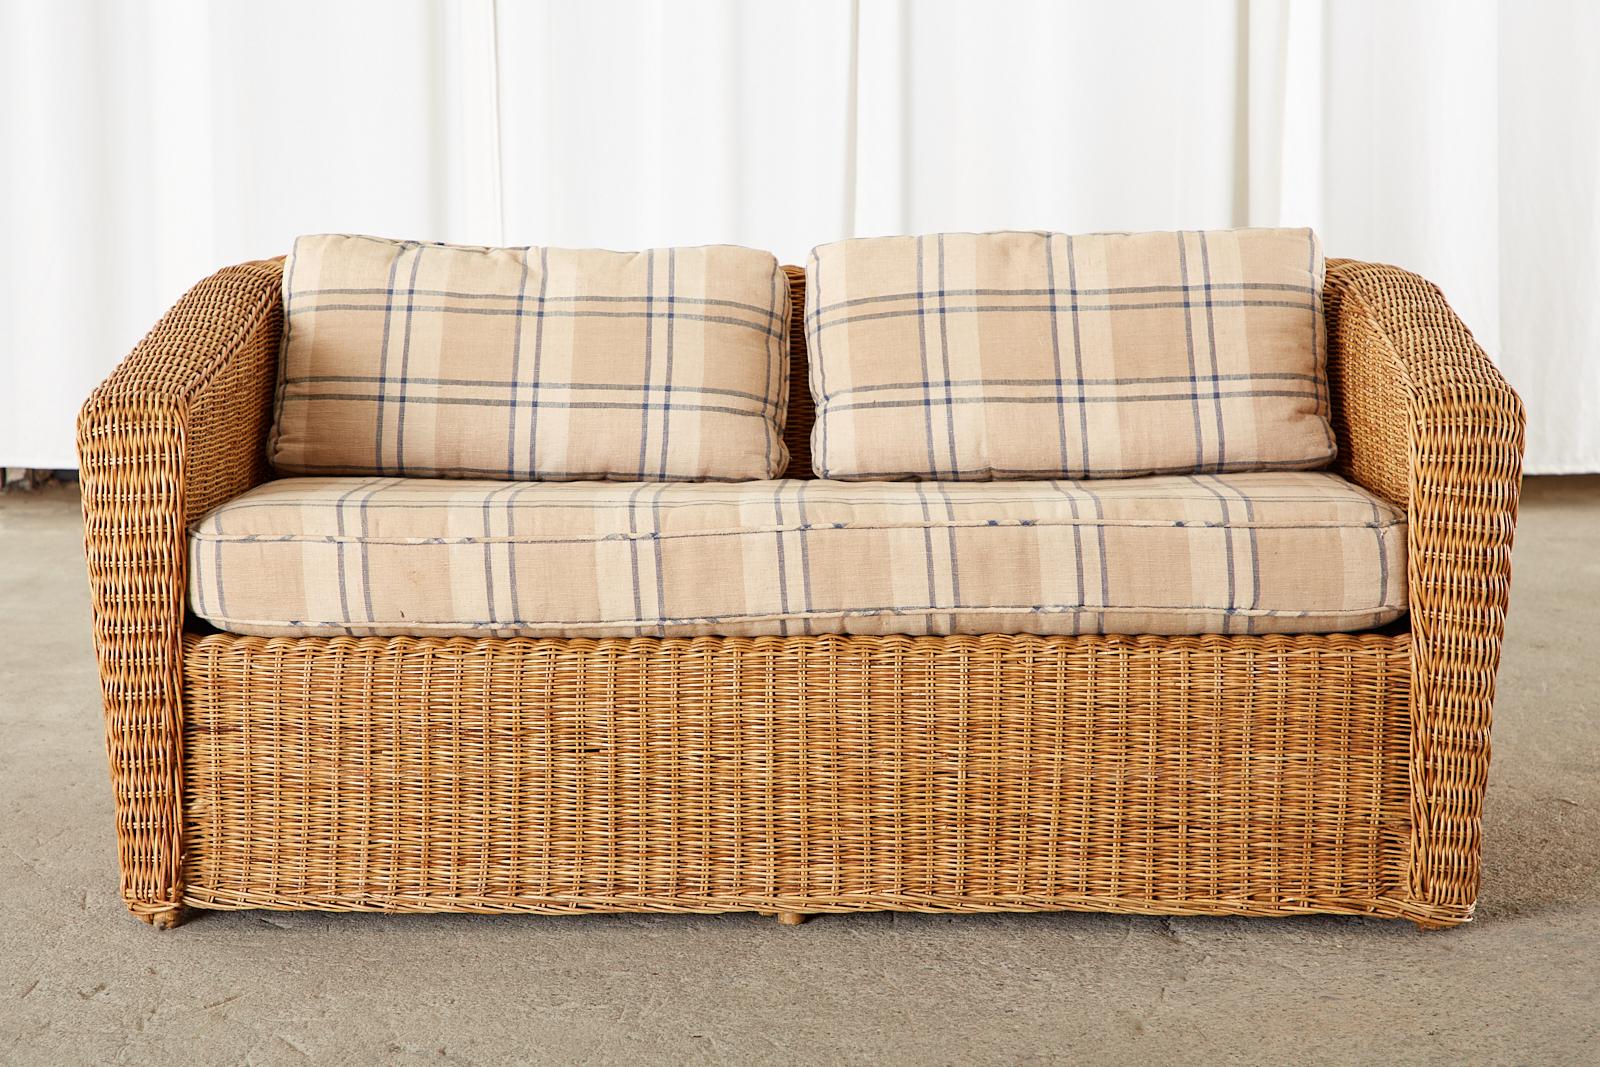 Distinctive Mid-Century Modern case loveseat shaped sofa featuring a rattan frame covered with woven wicker. Made in Italy in the organic modern style. The back and arms are slightly flared with a thick braided, flat border. Fitted with a loose seat